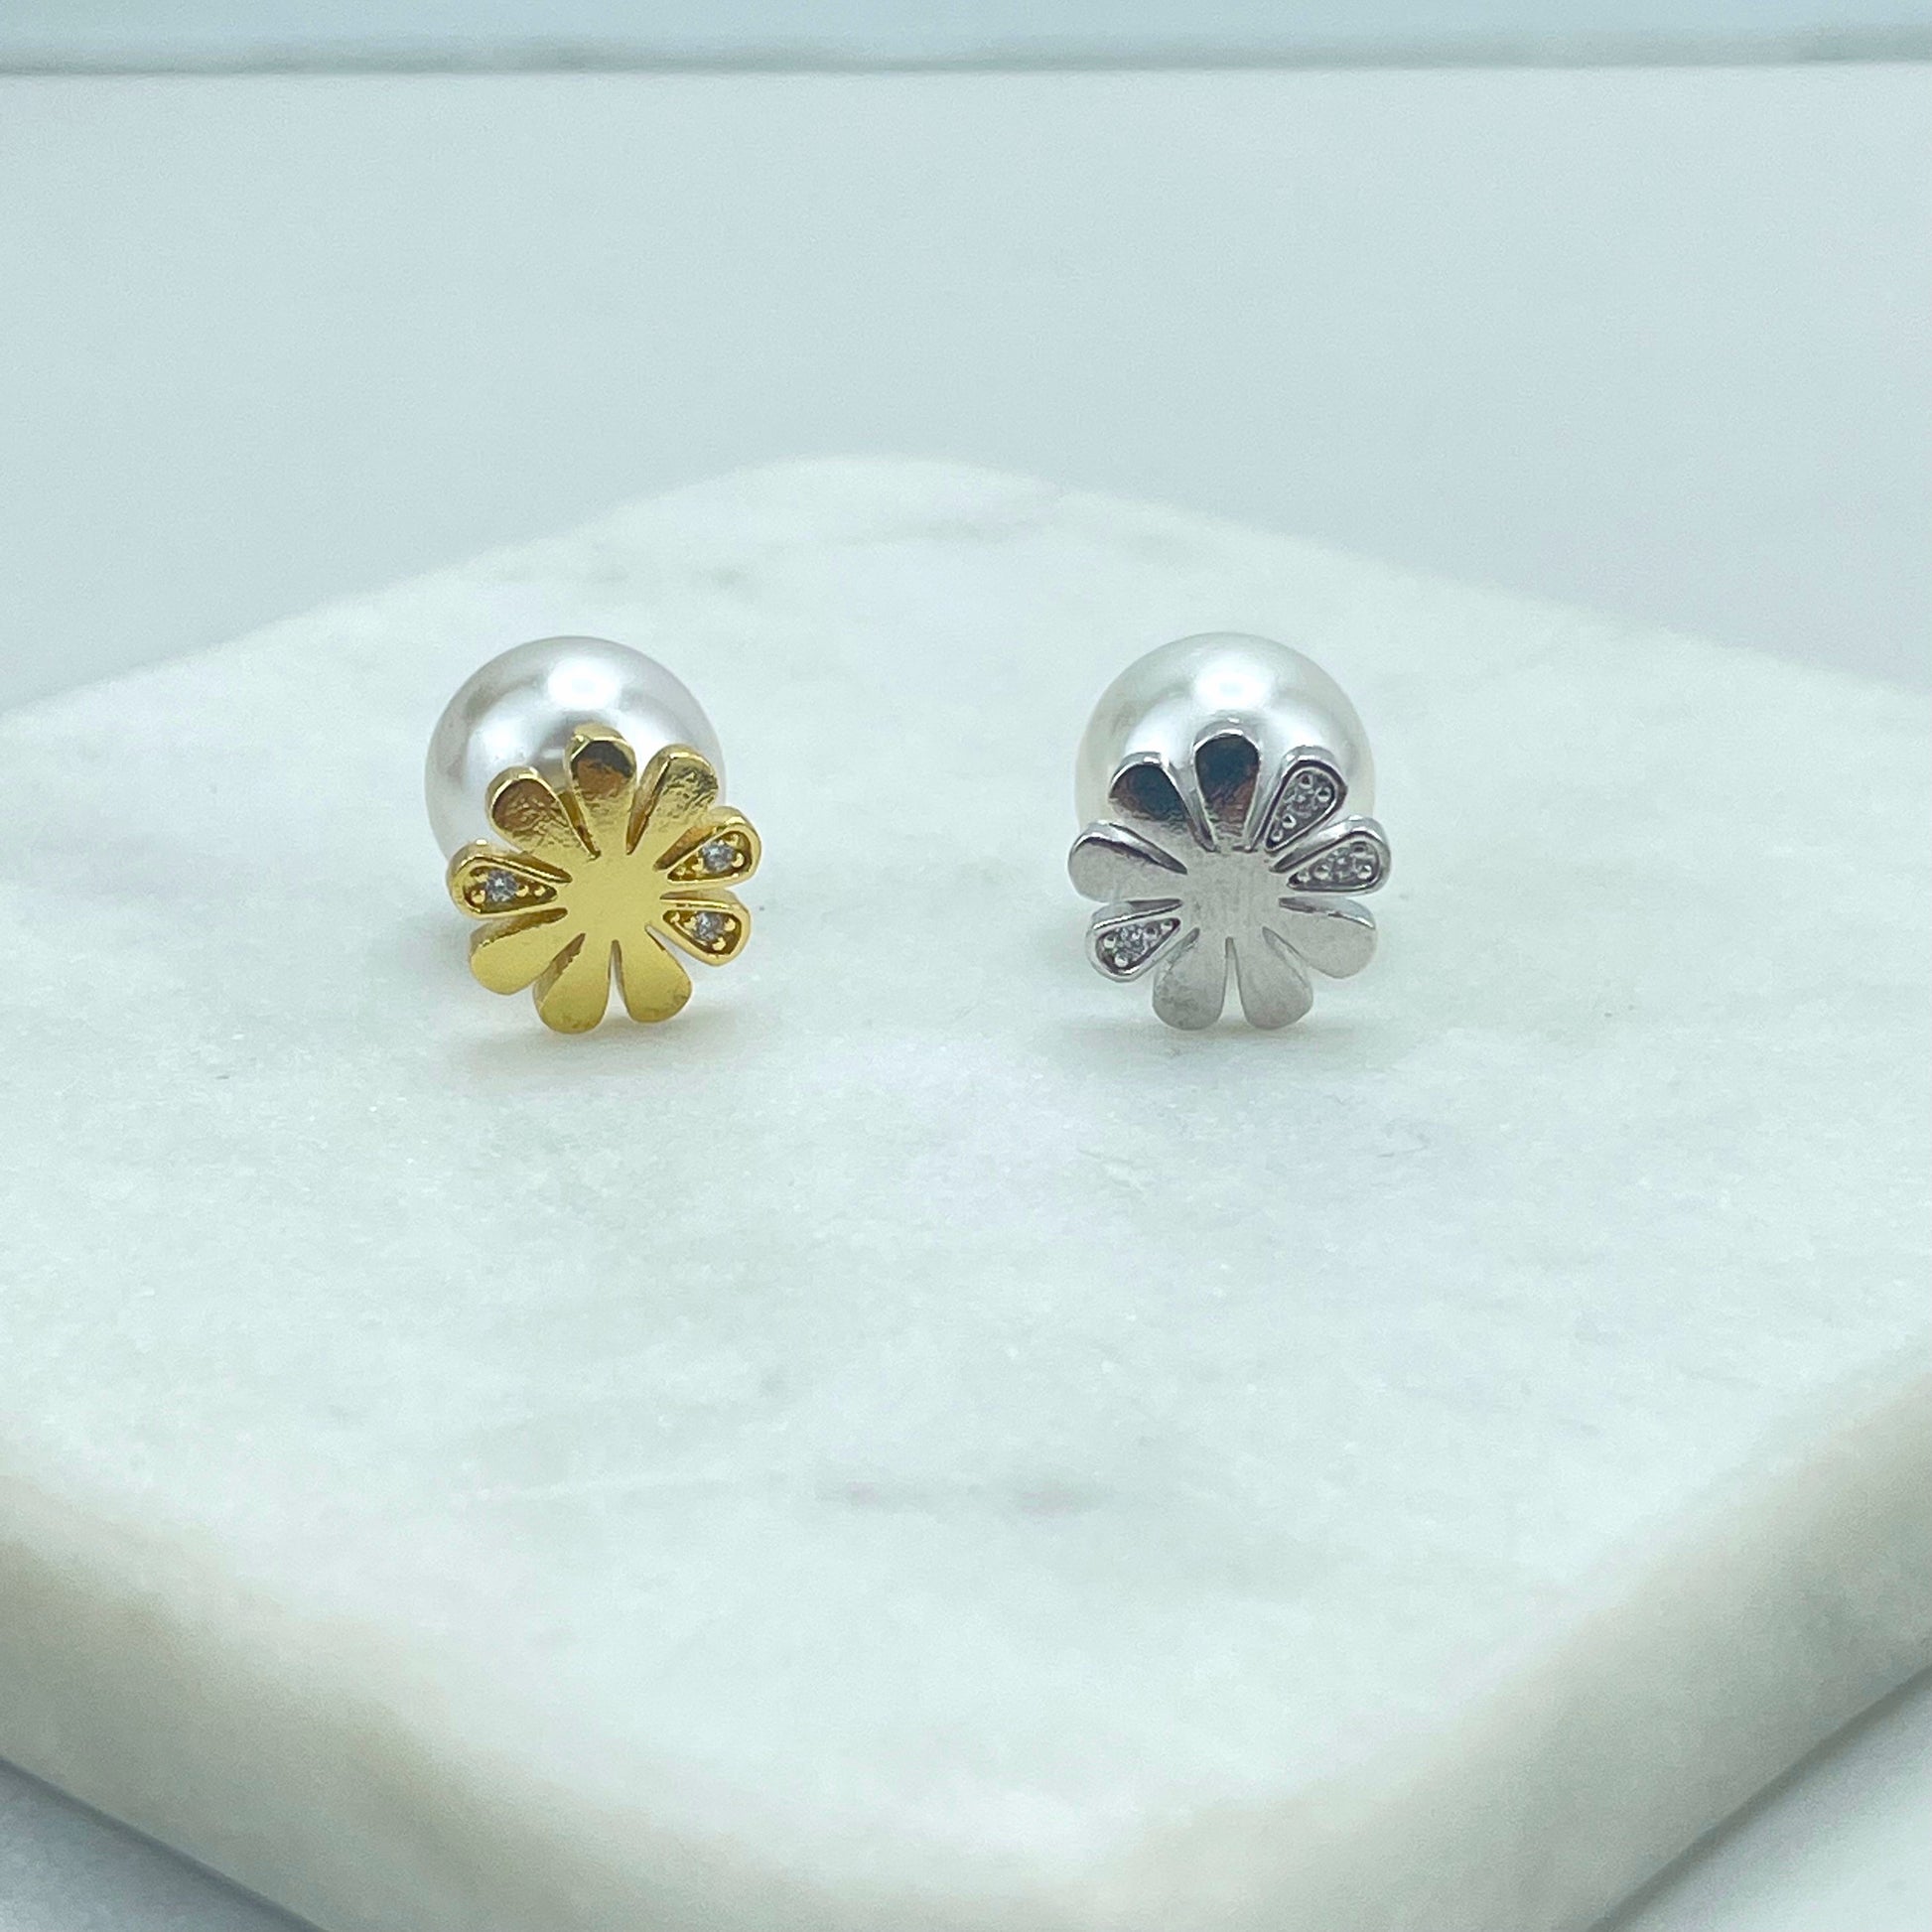 18k Gold Filled or Silver Filled, Clear CZ Flower Shape with Pearl, Ear Jacket, Front Back Stud Earrings, Double Sided Wholesale Jewelry